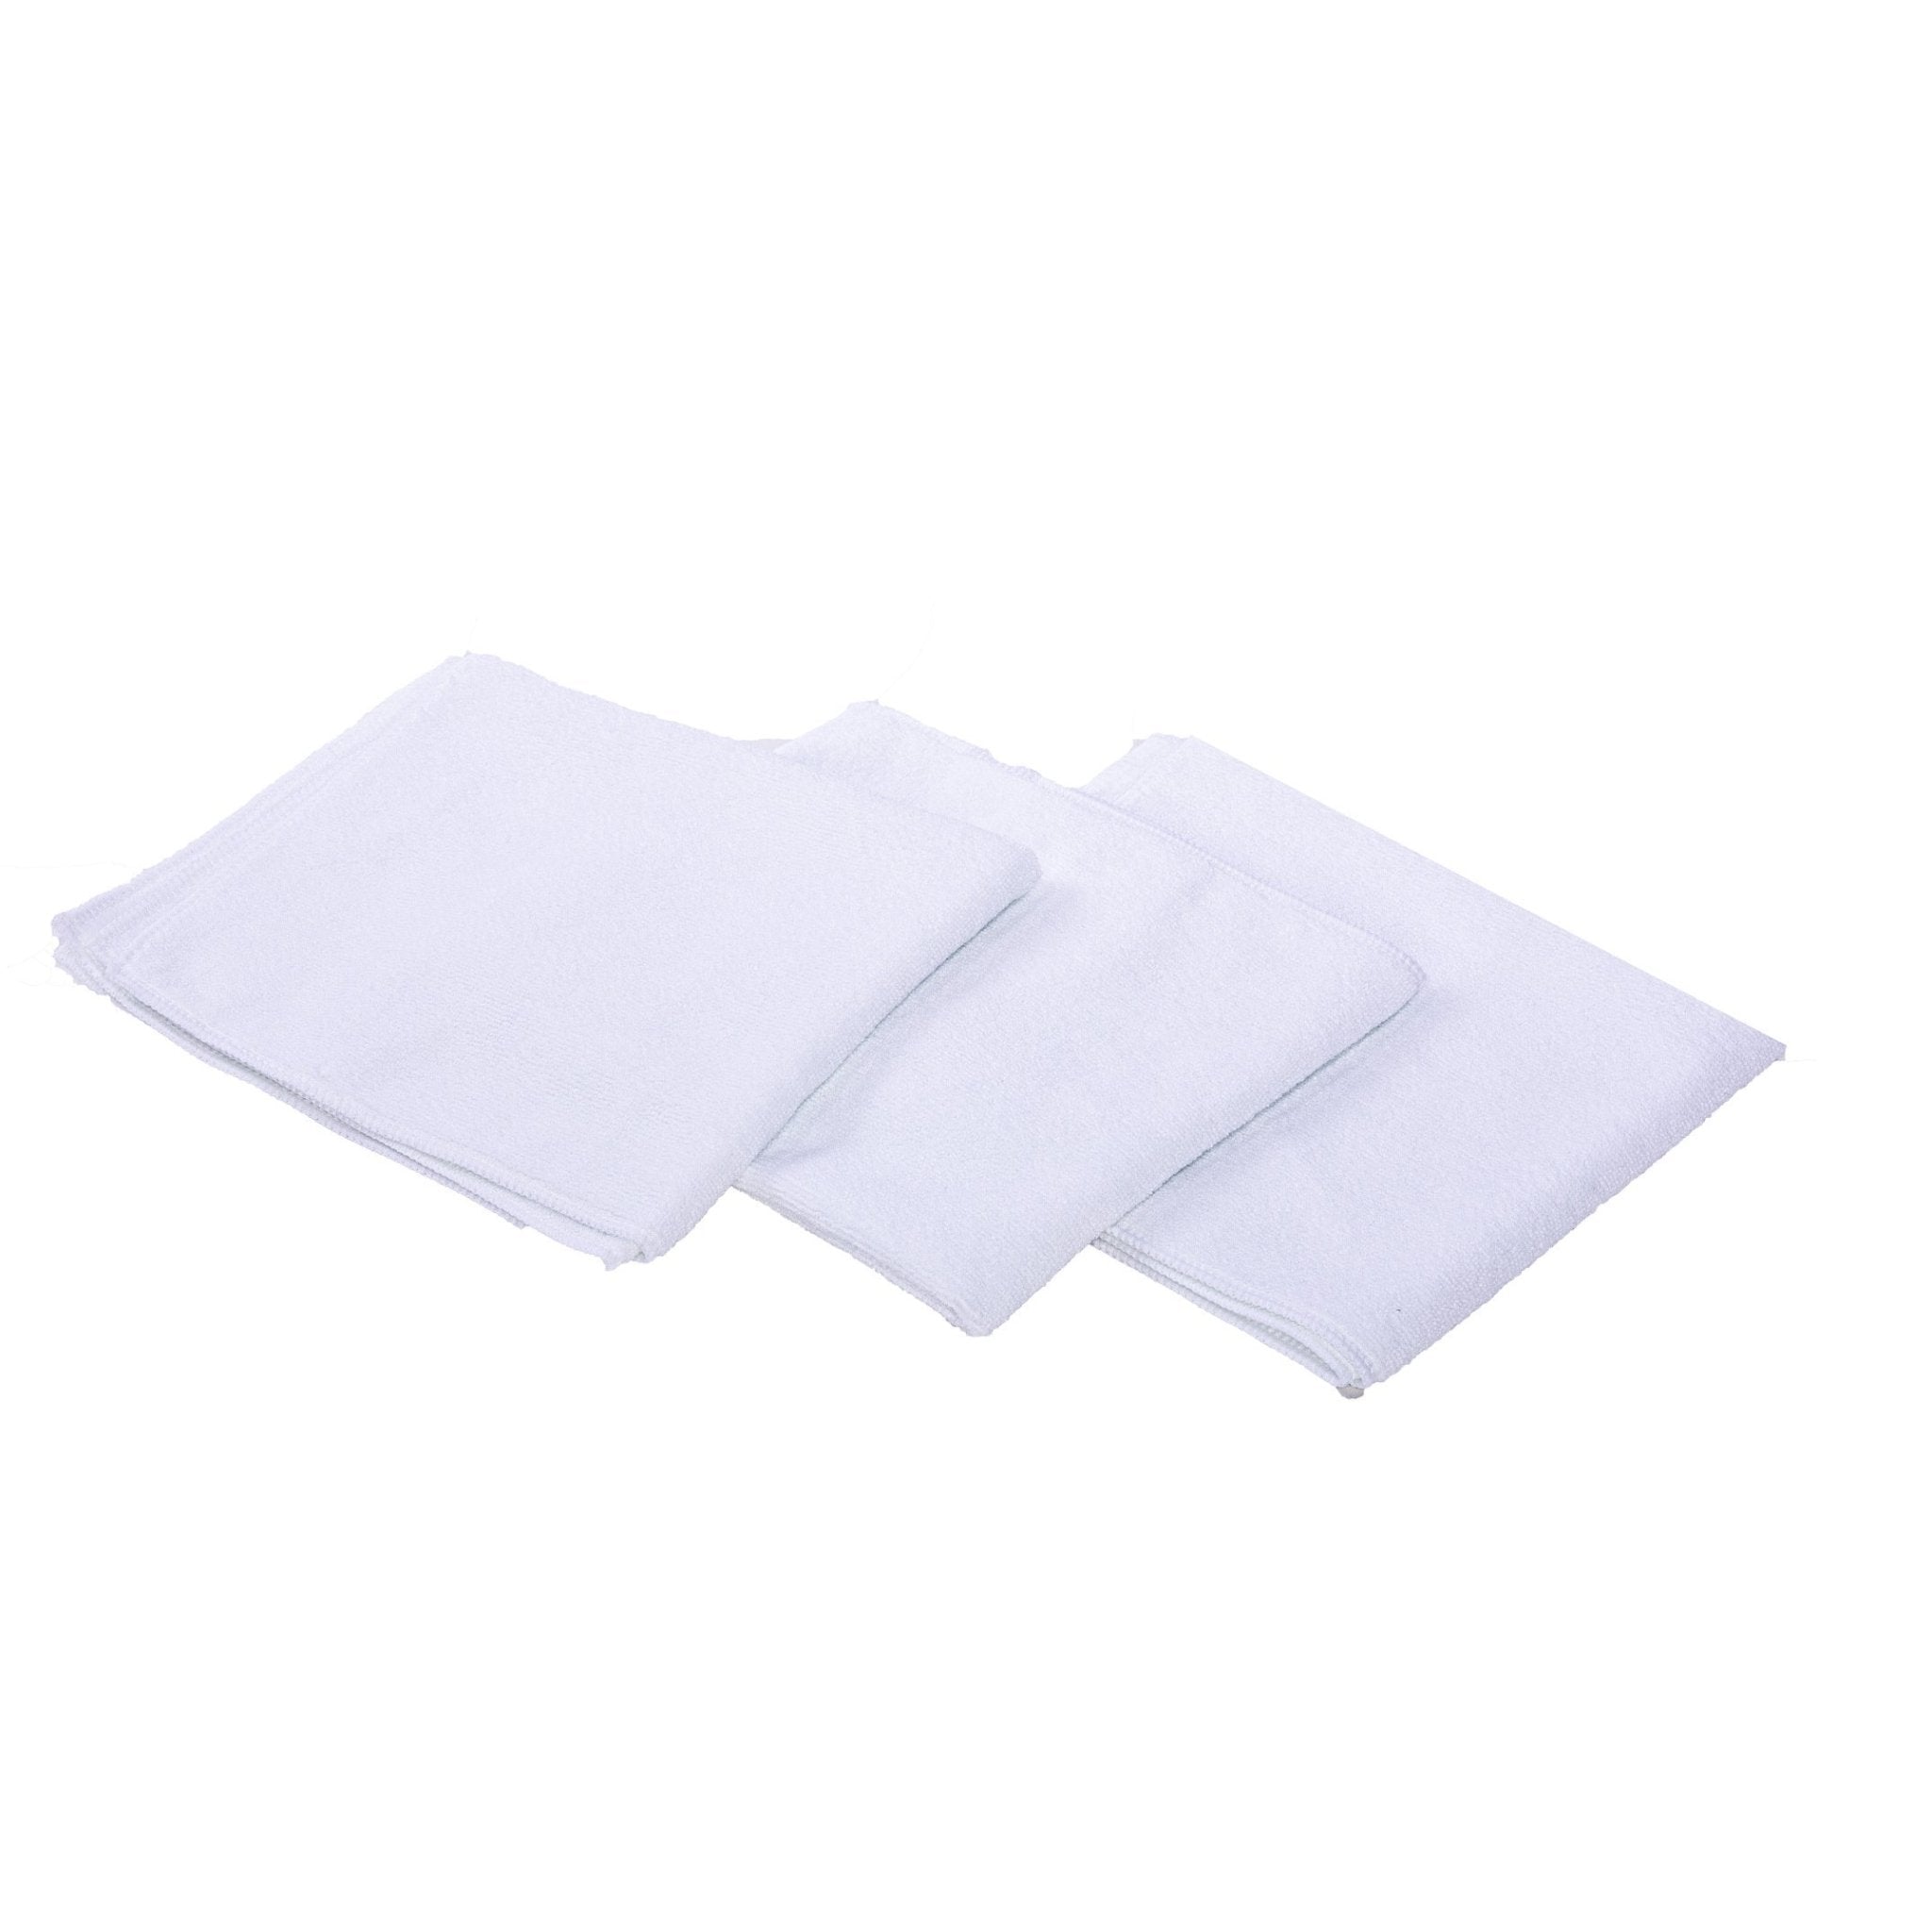 Varro ThermoFiber Cloths (3 PACK) - Soniclean